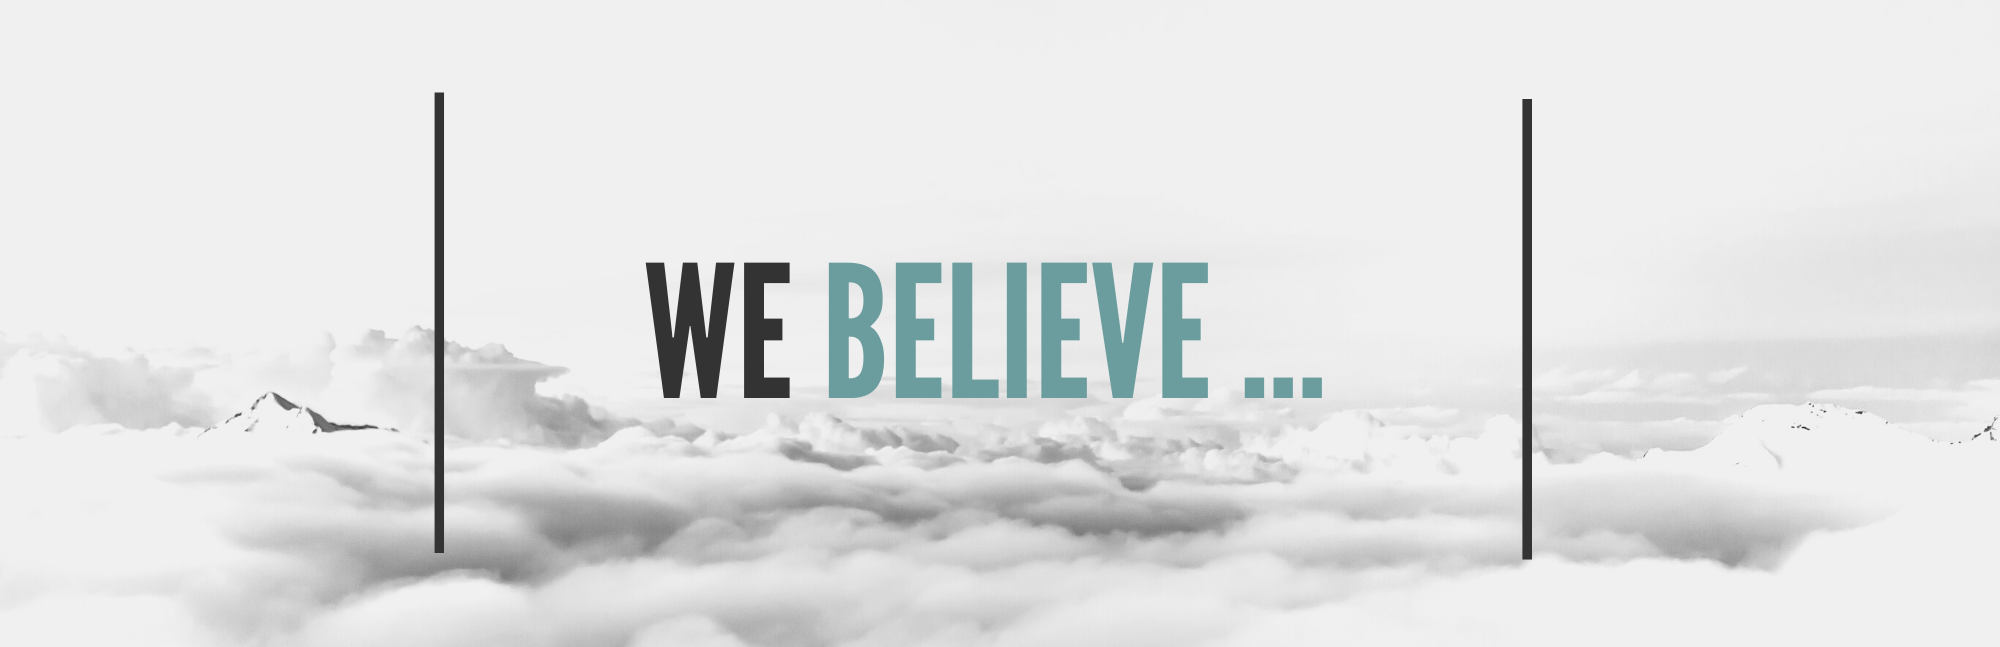 Want to know more about our beliefs?